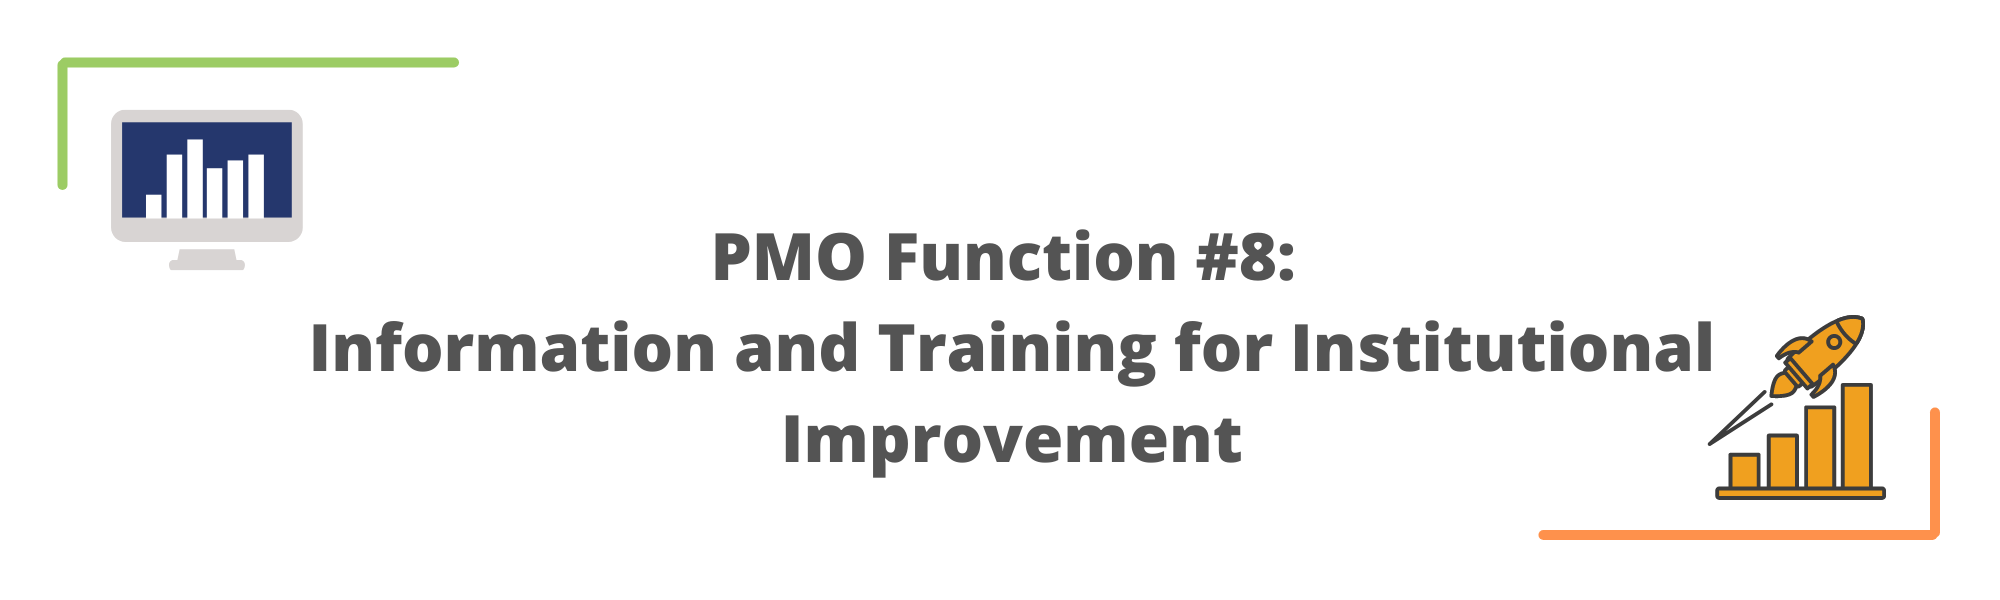 PMO Function #8 Information and Training for Institutional Improvement